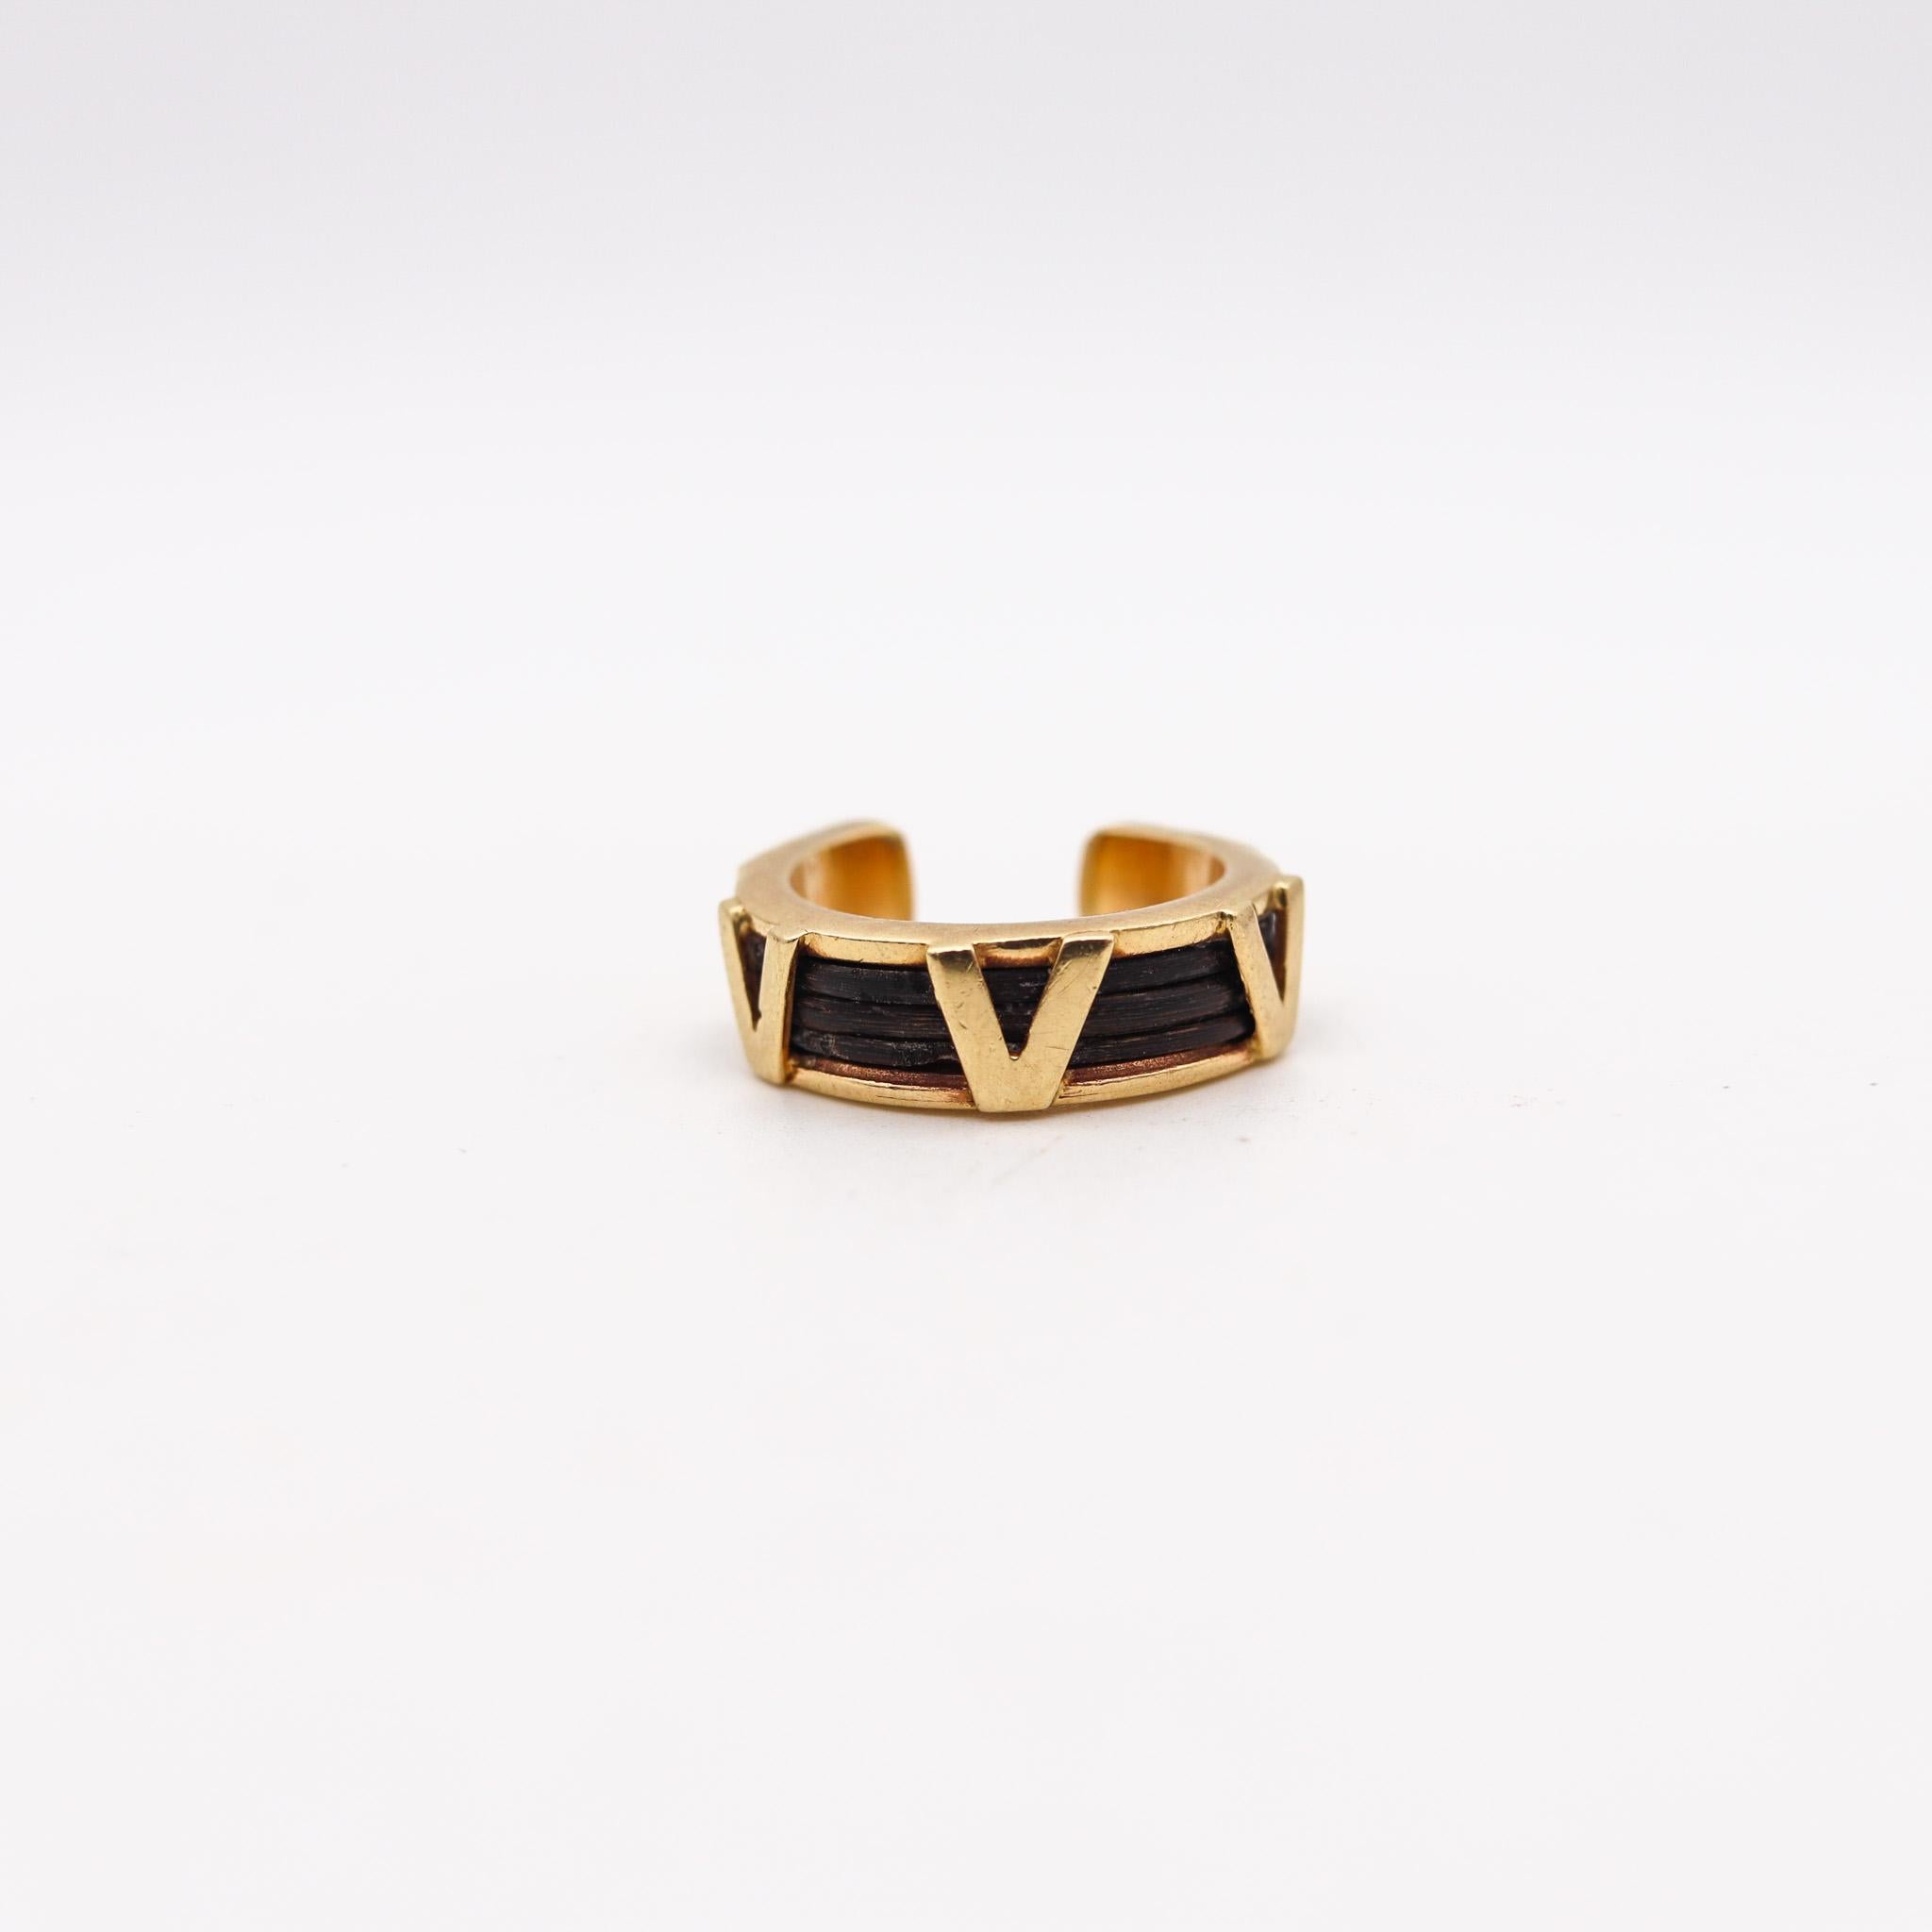 An elephant's hair ring designed by Valentino.

Fabulous band ring, created in Milano Italy by the fashion house of Valentino, back in the 1970. This nice ring has been designed with three V letters for Valentino and crafted in solid yellow gold of